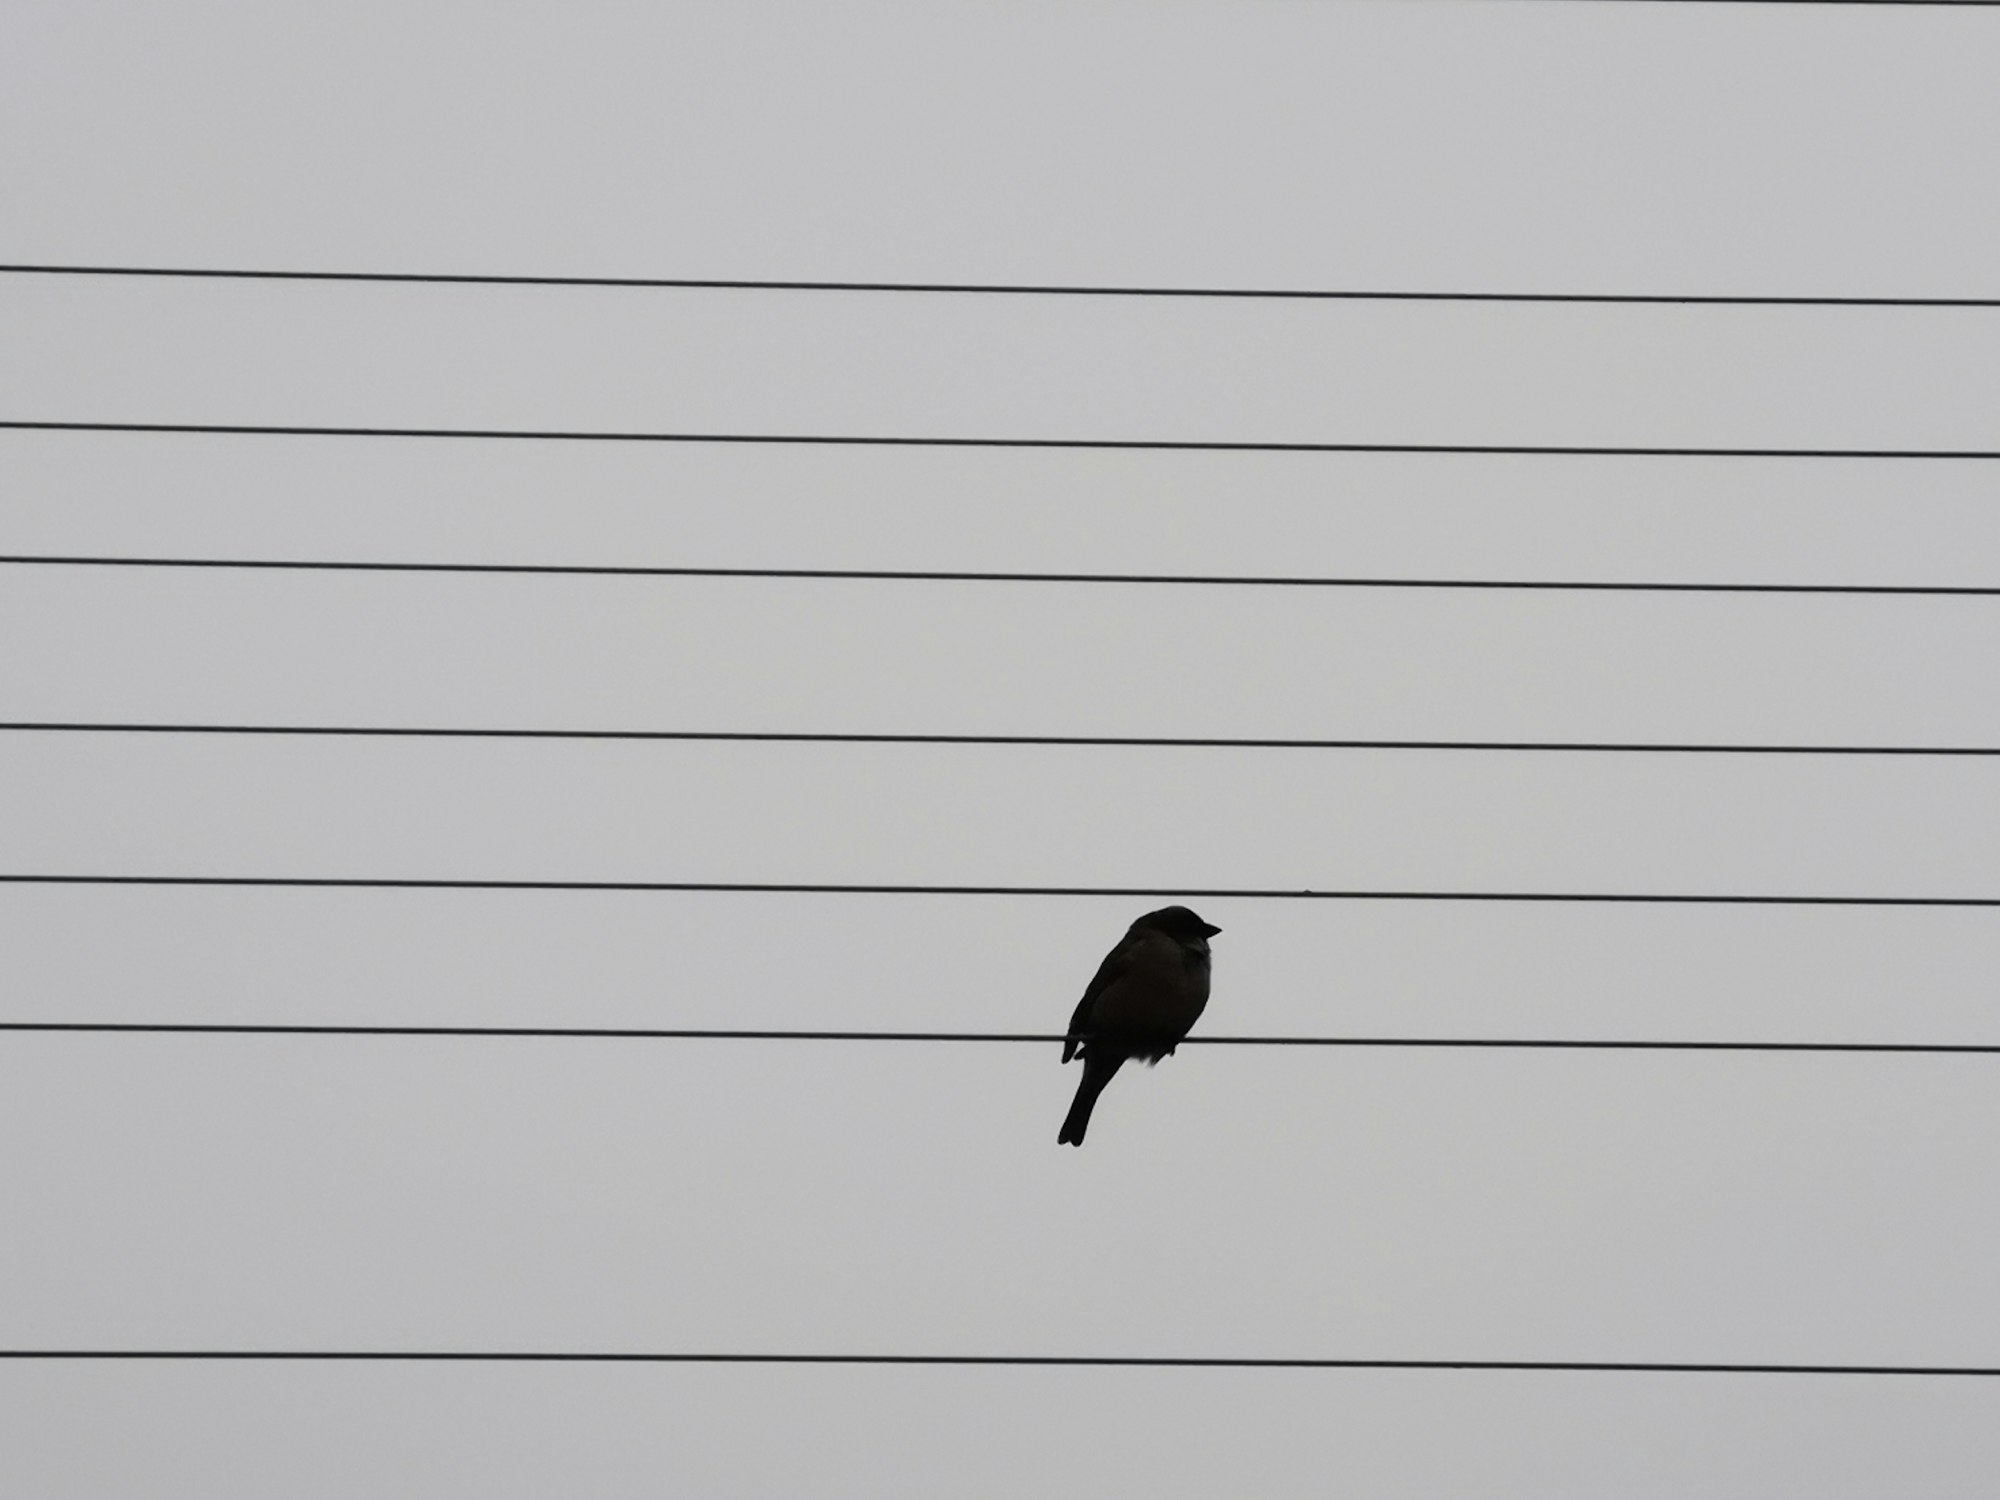 Silhouette of a blackbird resting on a telephone wire, with five wires above and one below the wire the bird is standing on.